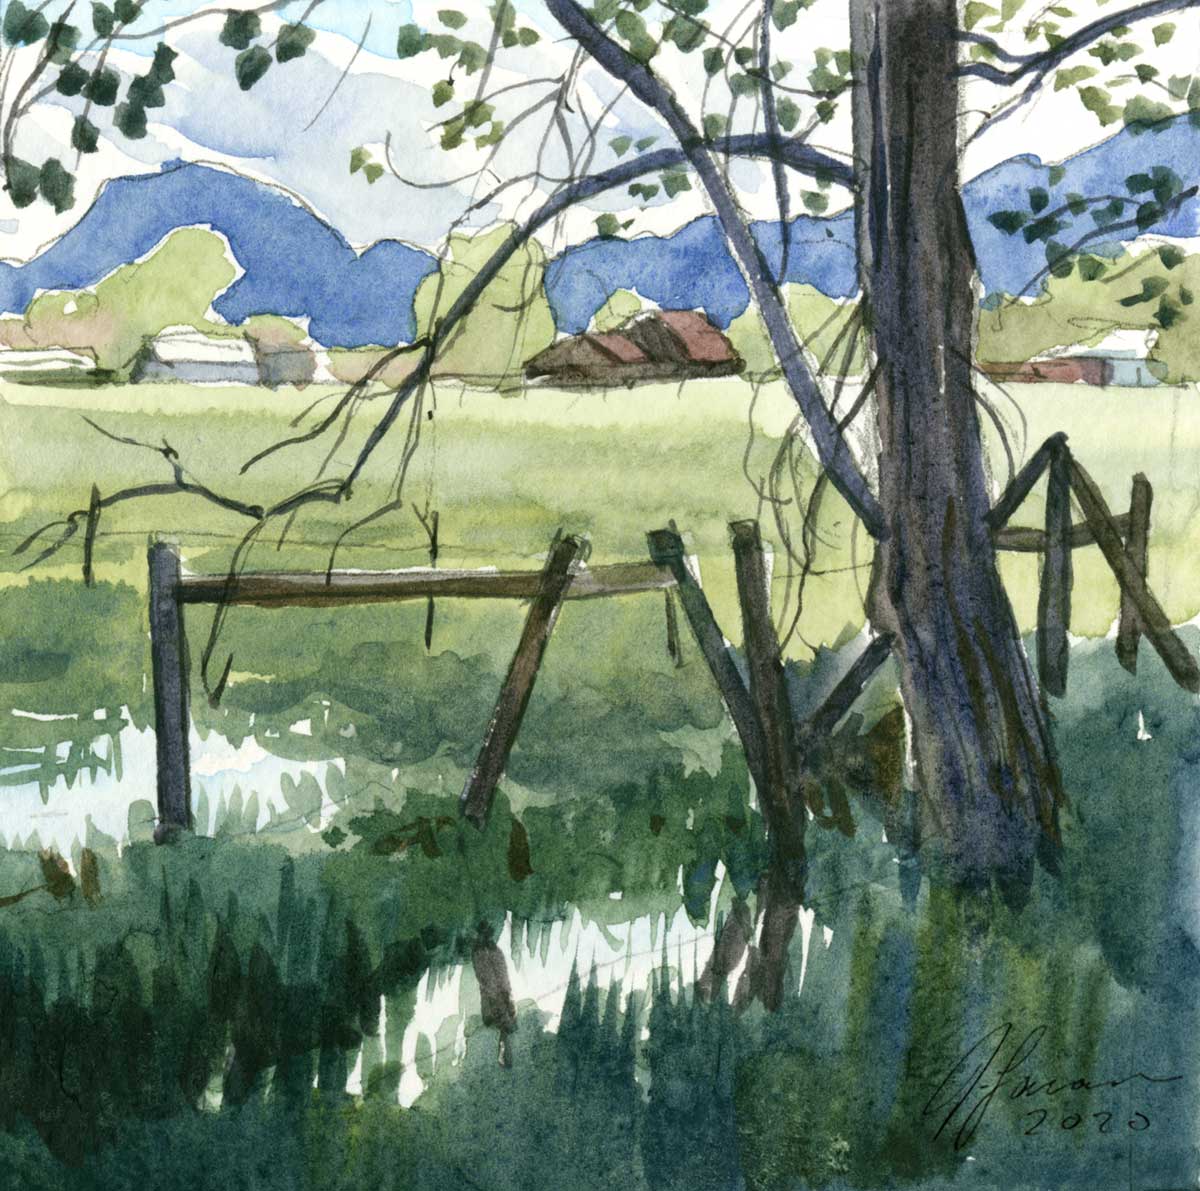 Watercolor sketch of a field with farm buildings and blue mountains behind framed by tree branches and fence posts. In the foreground, puddles of water among deep grass reflect a pale sky.